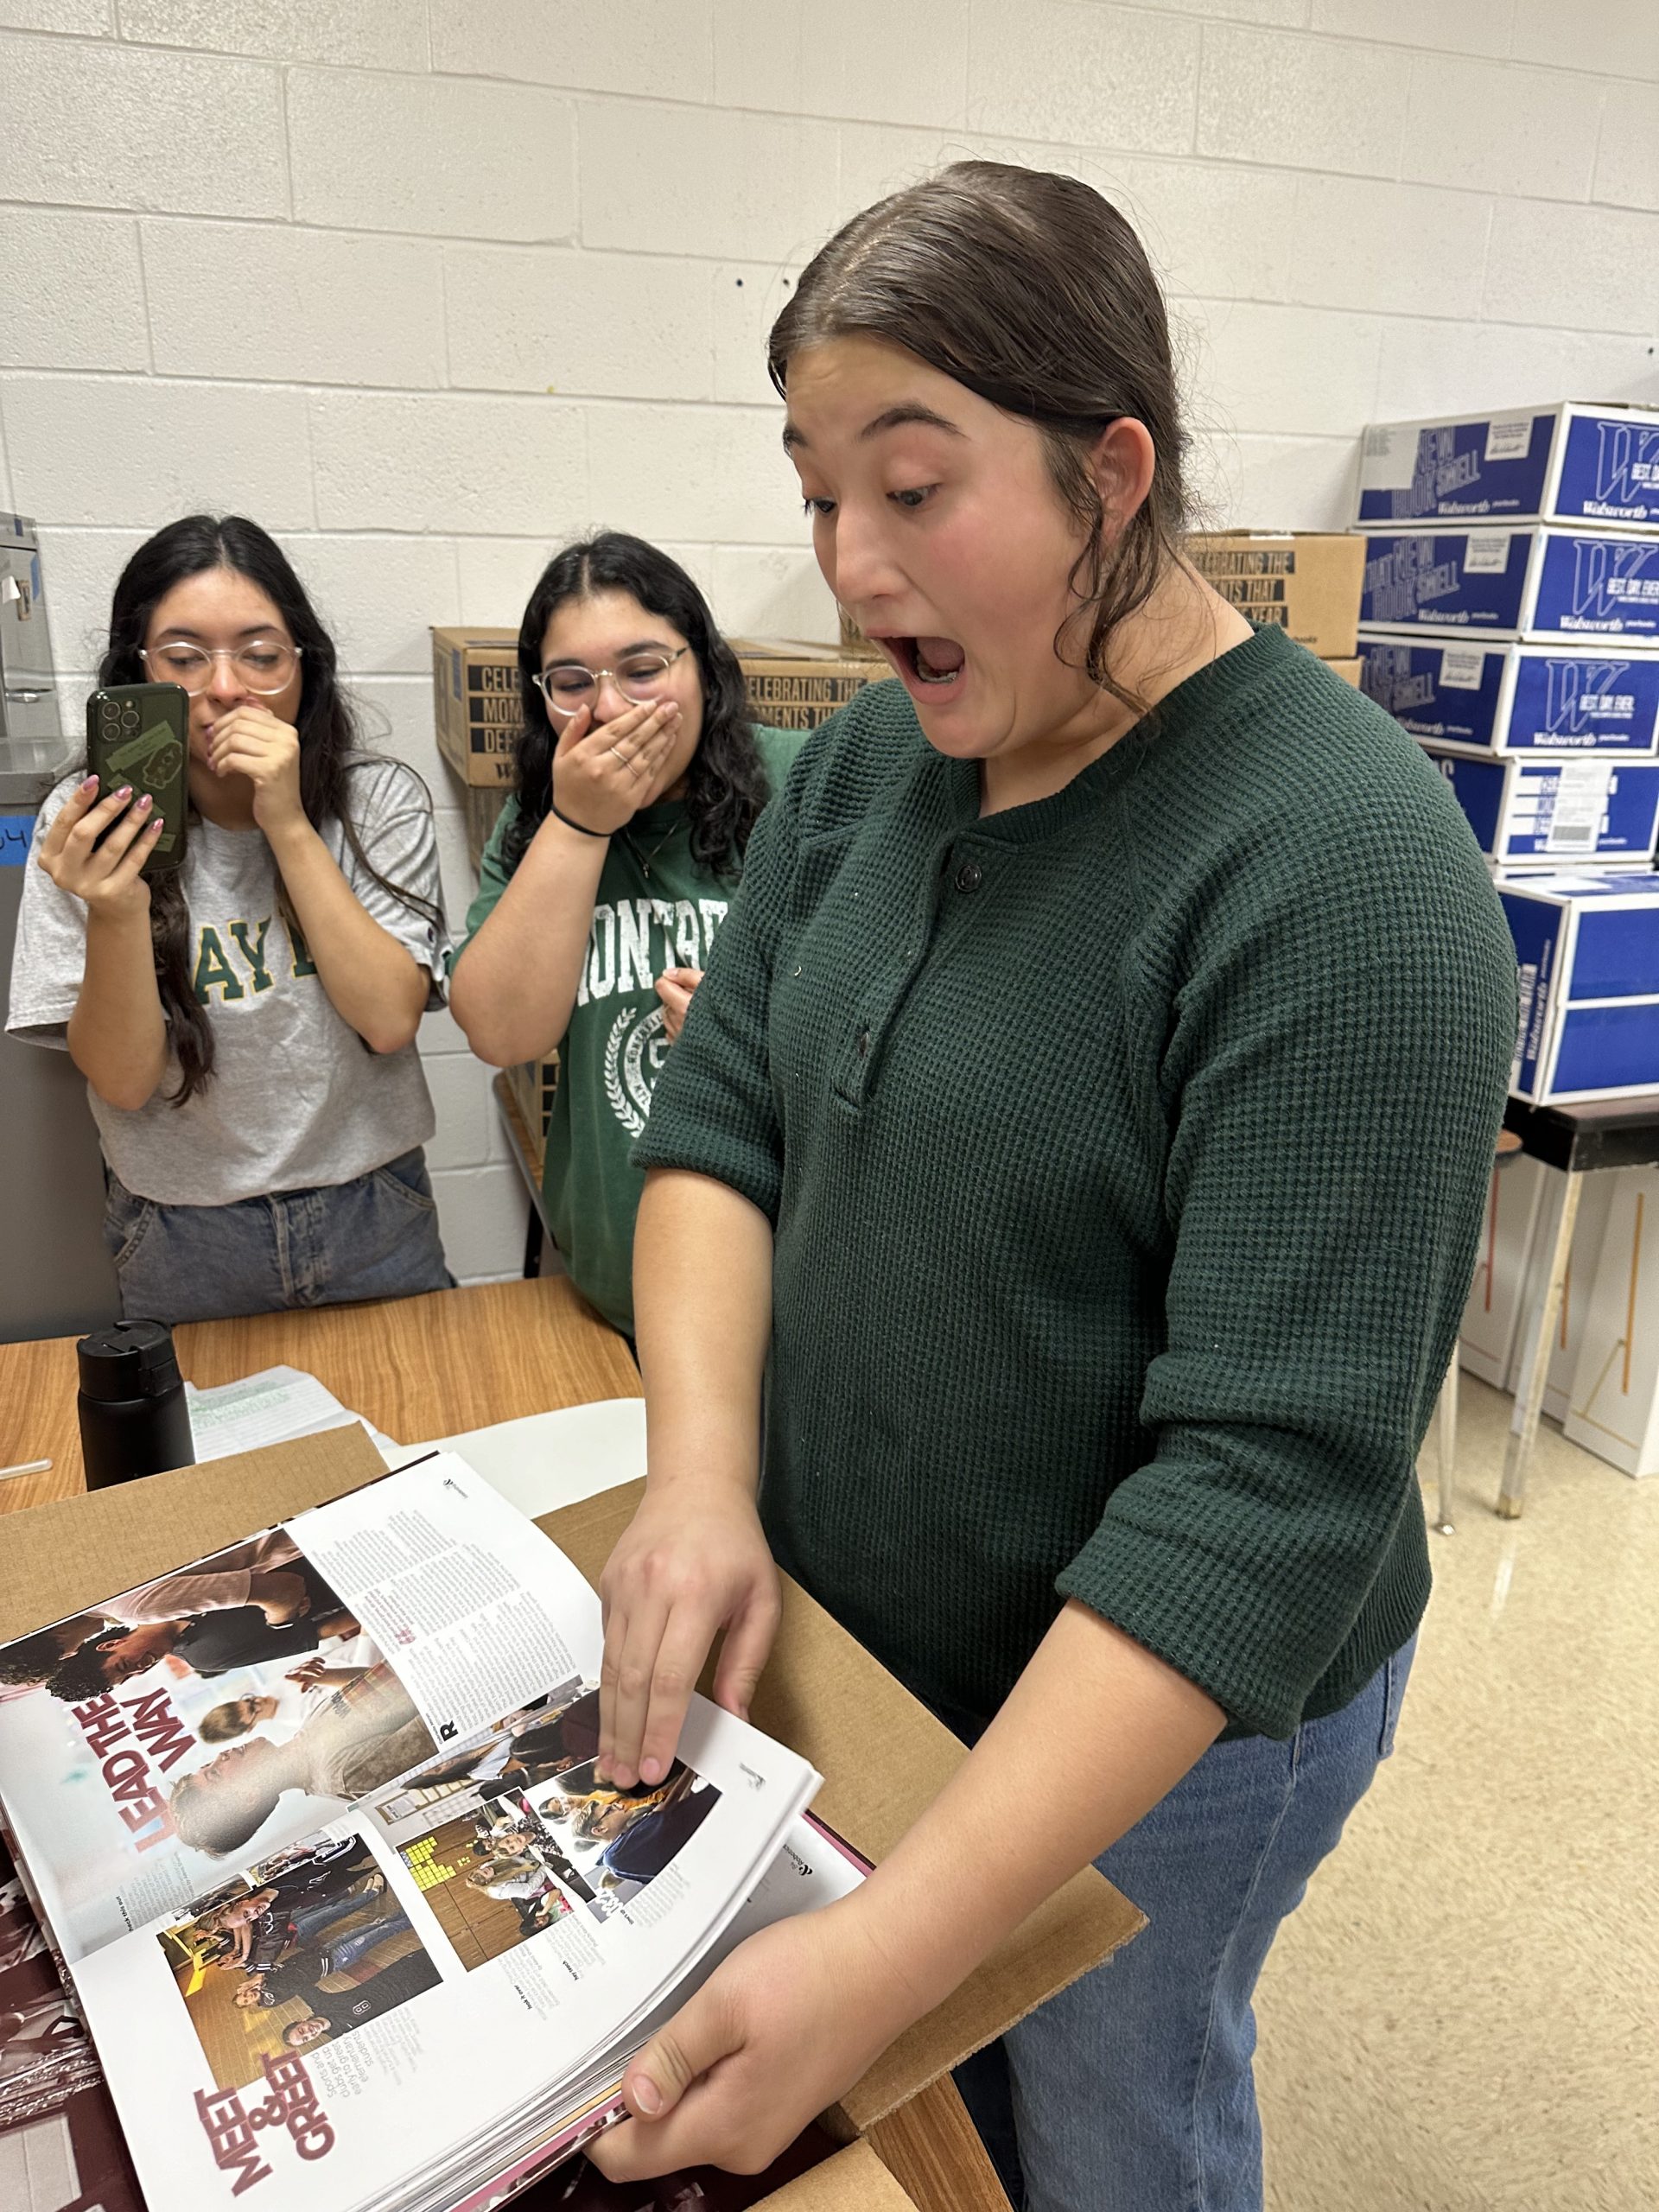 Three students standing around a yearbook pointing at a photo. Their expressions are in surprise. The photo in the yearbook that the students are pointing at is just a group photo of more students. Nothing to be alarmed by, trust me.